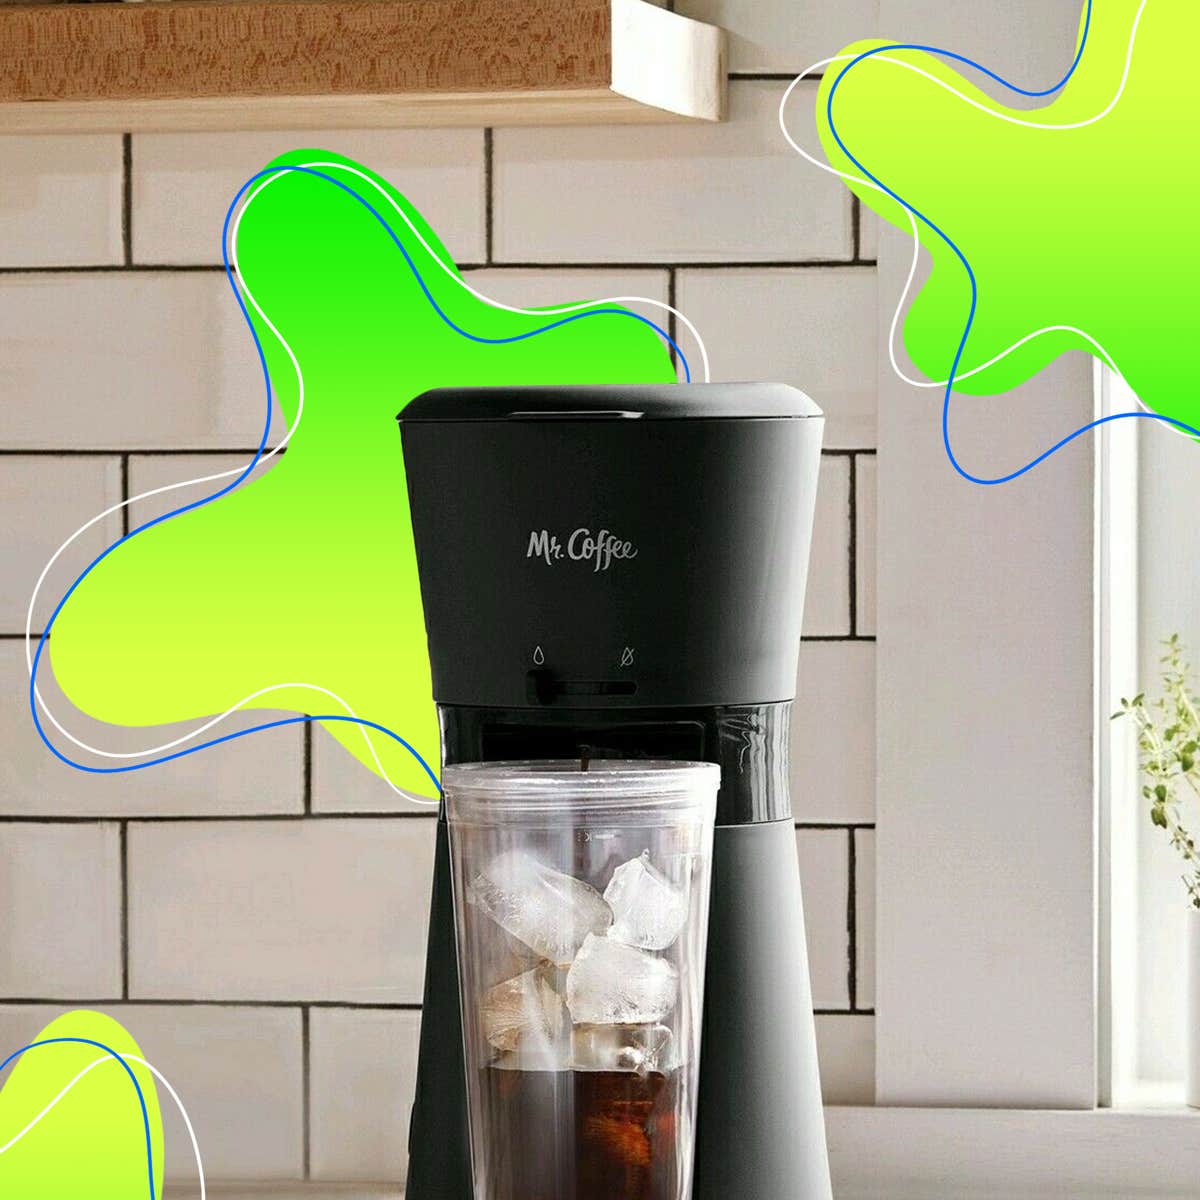 Instant Iced Coffee Machine Jot Ultra Coffee Review The Instant Iced